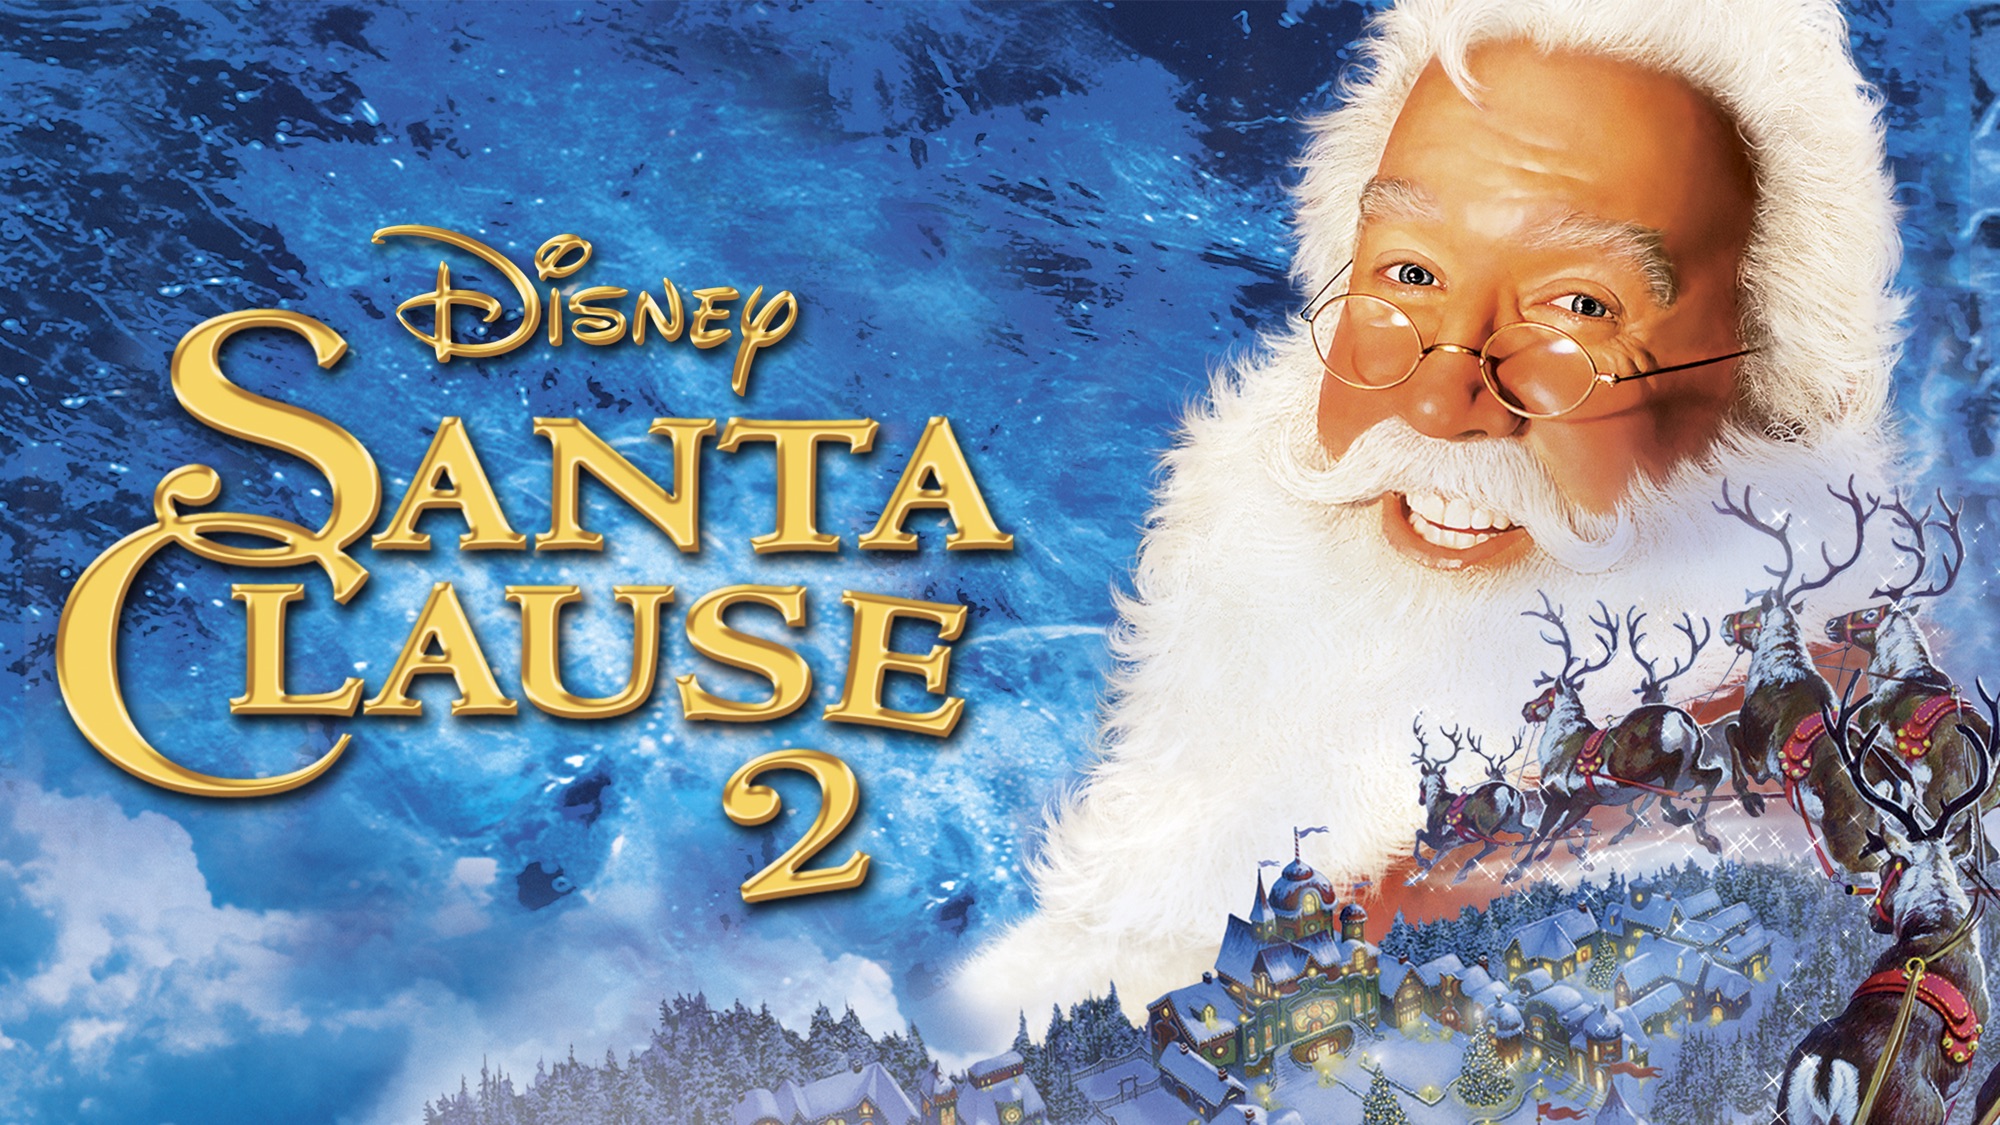 Movie The Santa Clause 2 HD Wallpaper | Background Image